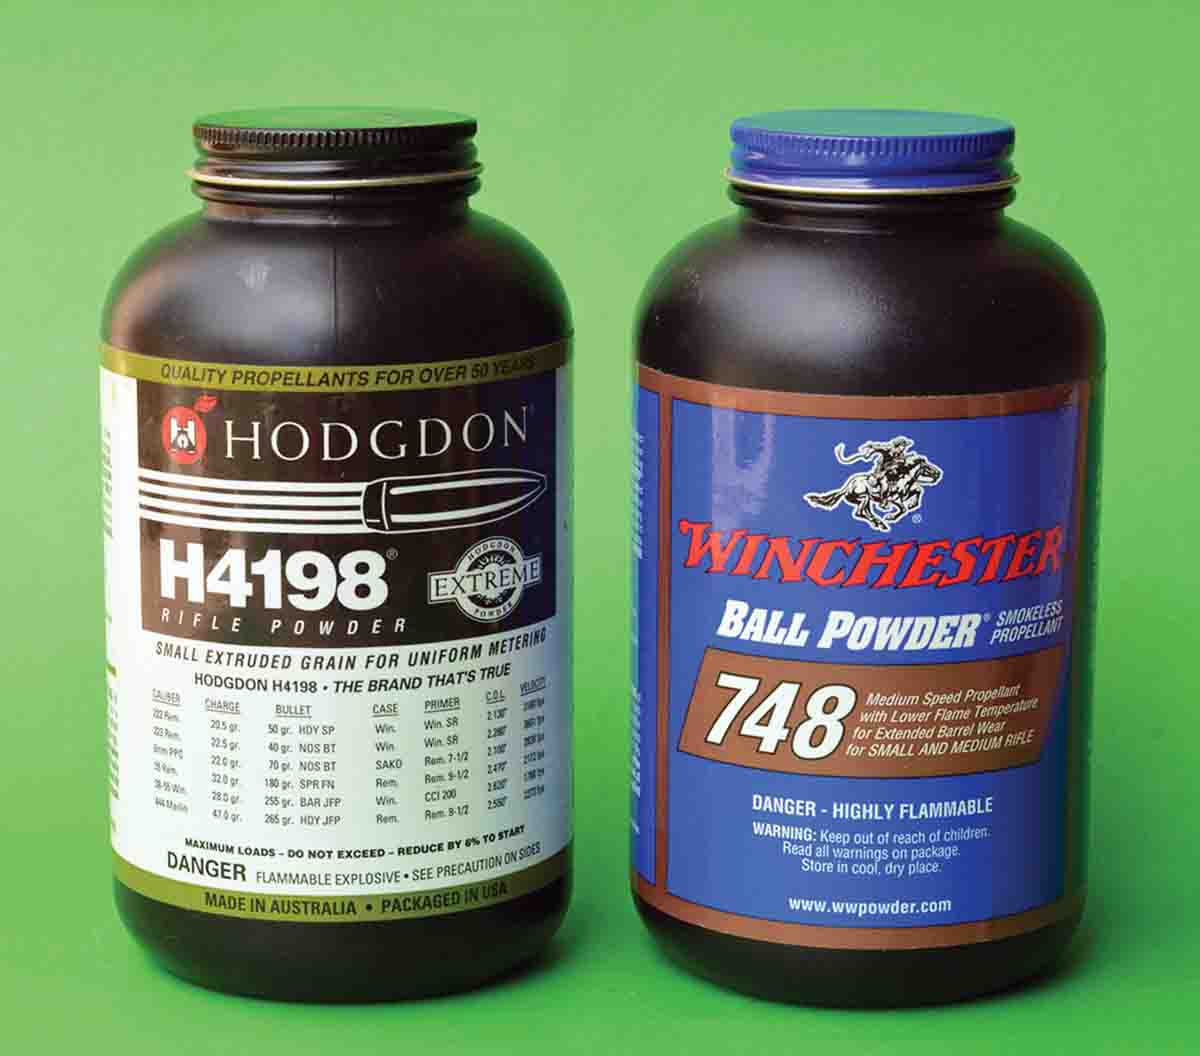 Single-base extruded powders, such as Hodgdon H-4198, are notably easier to ignite than double- base spherical powders such as Winchester 748. Primer choice should correspond with powder choice to assure reliable ignition.